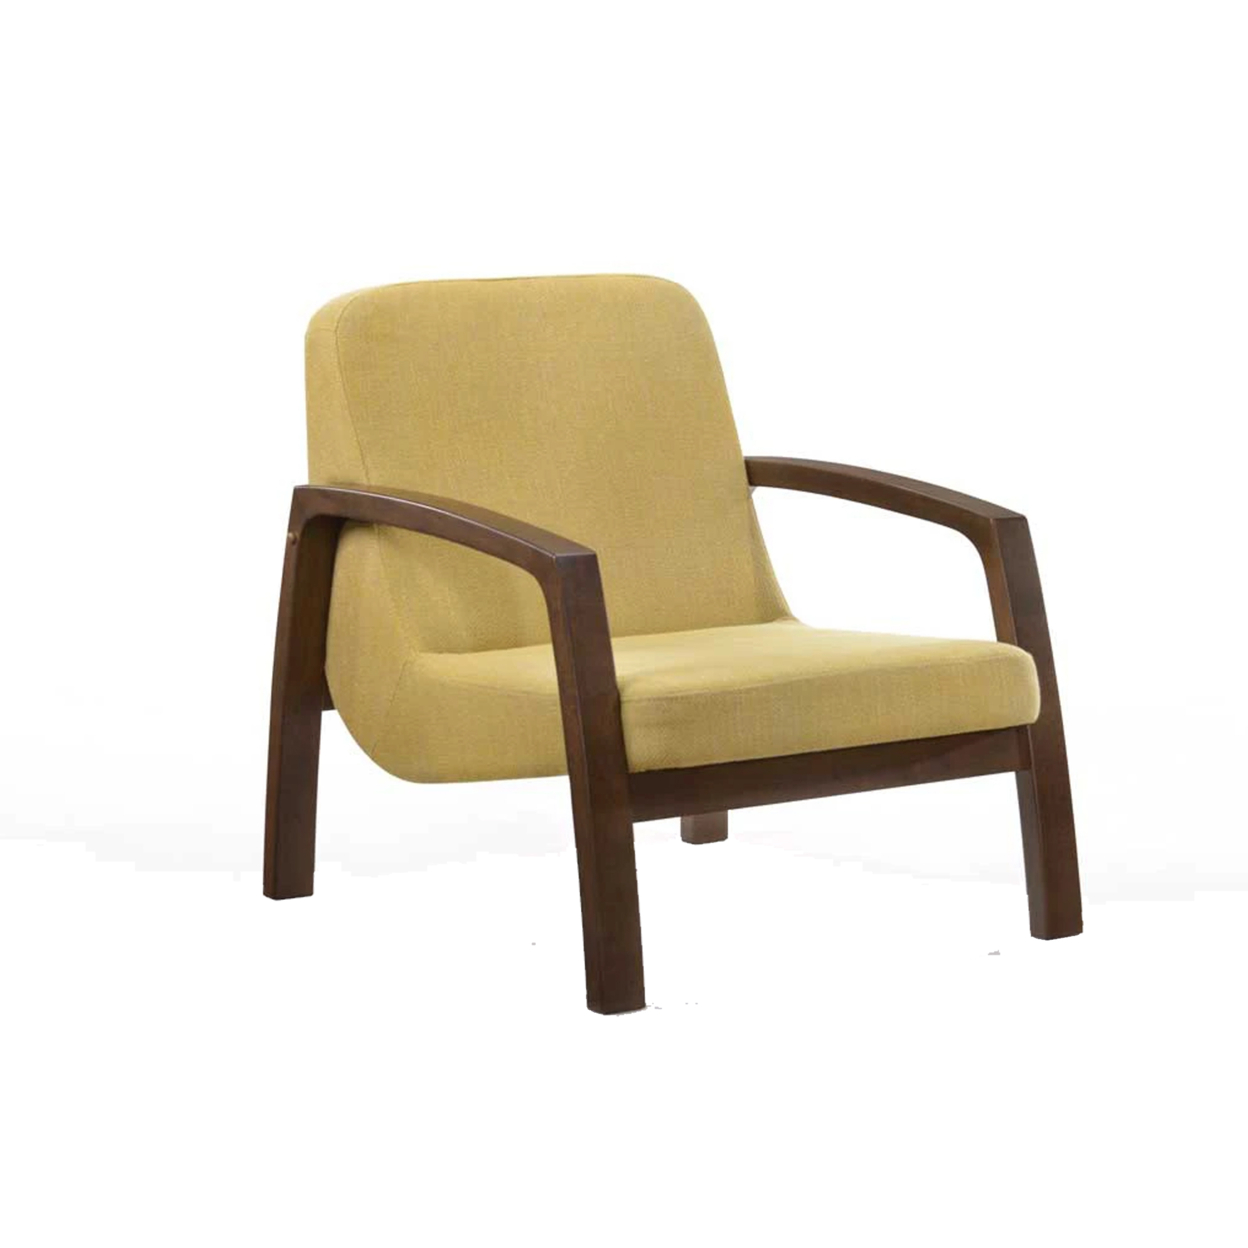 Wooden Lounge Chair With Block Legs And Padded Seat, Yellow- Saltoro Sherpi